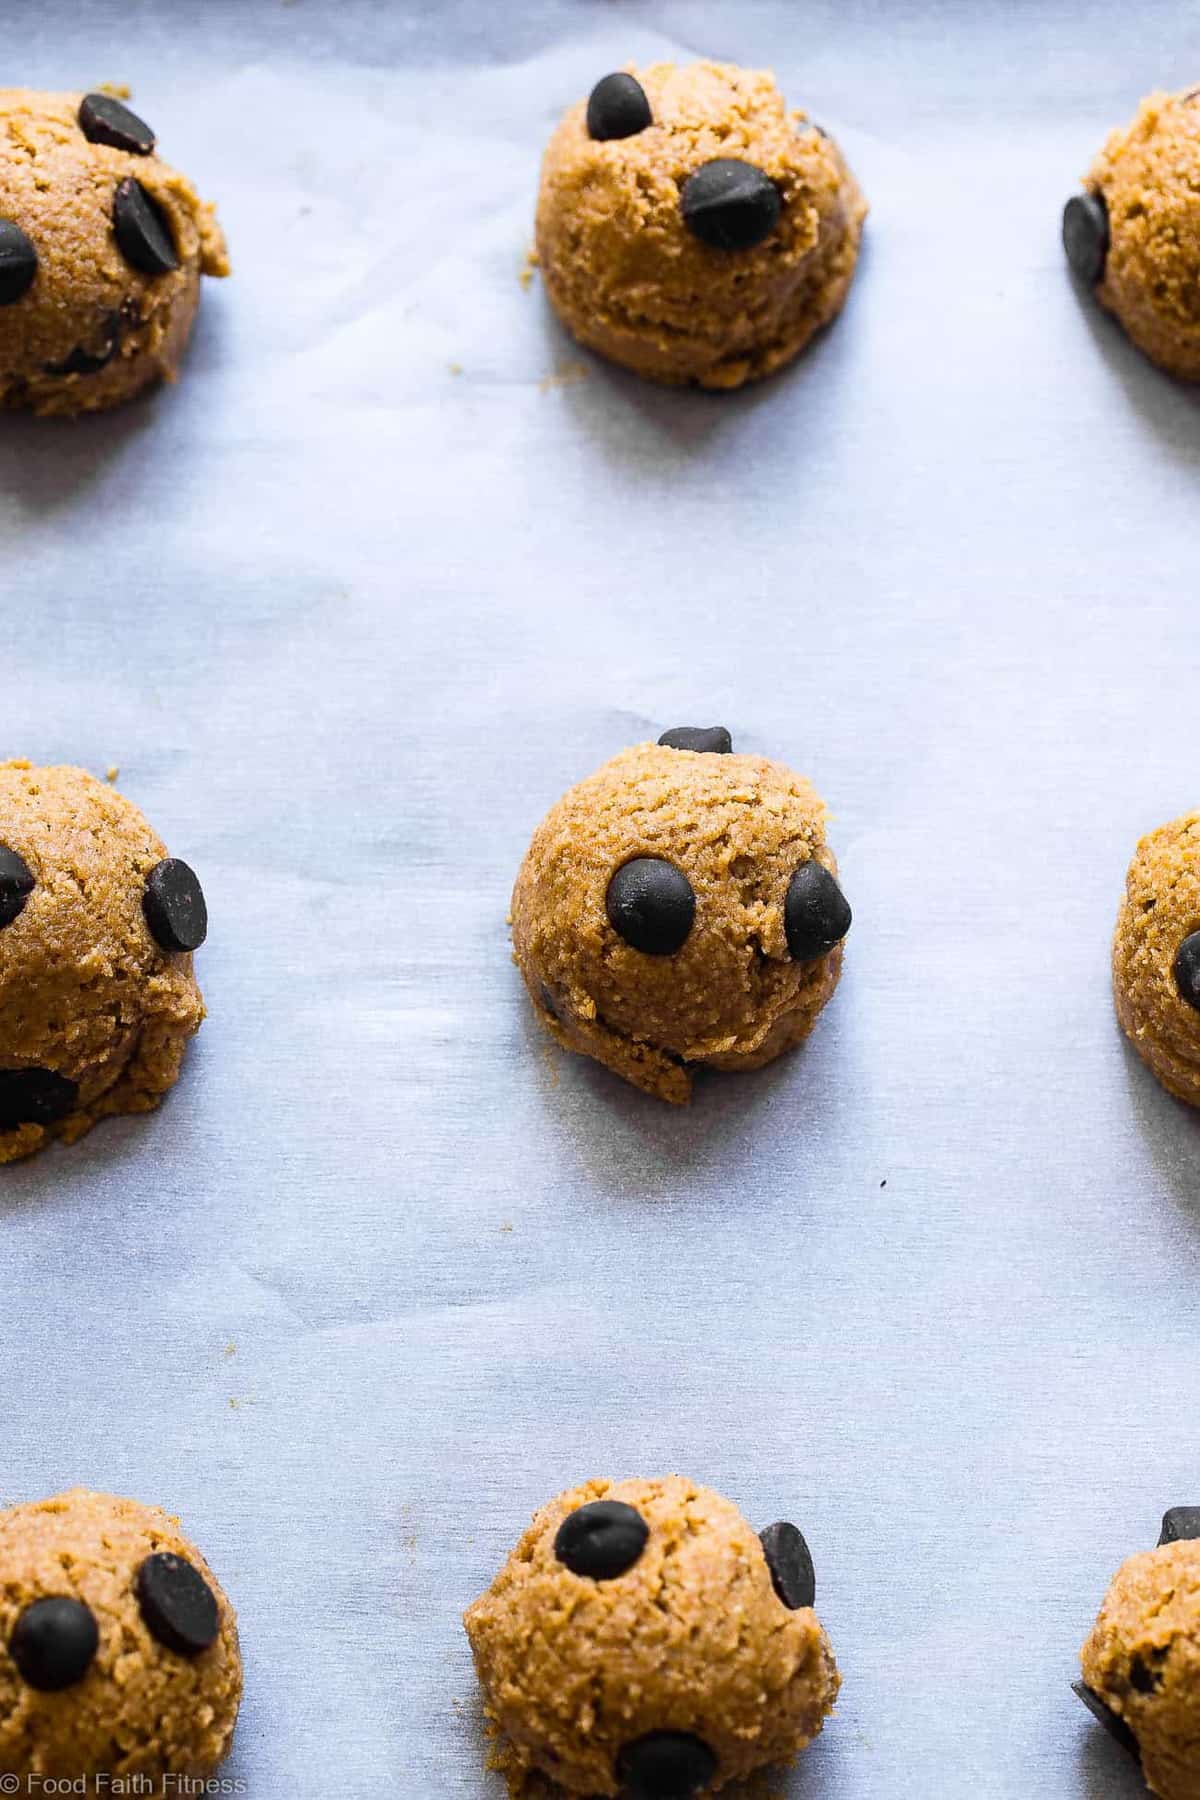 Pumpkin Spice Eggless Chocolate Chip Cookies Recipe - These are the best pumpkin Chocolate Chip Cookies! Crispy on the outside, chewy on the inside and have a punch of pumpkin spice! Gluten/dairy/egg free, vegan friendly and only 124 calories! | #Foodfaithfitness | #Glutenfree #Vegan #Dairyfree #Eggfree #Pumpkinspice